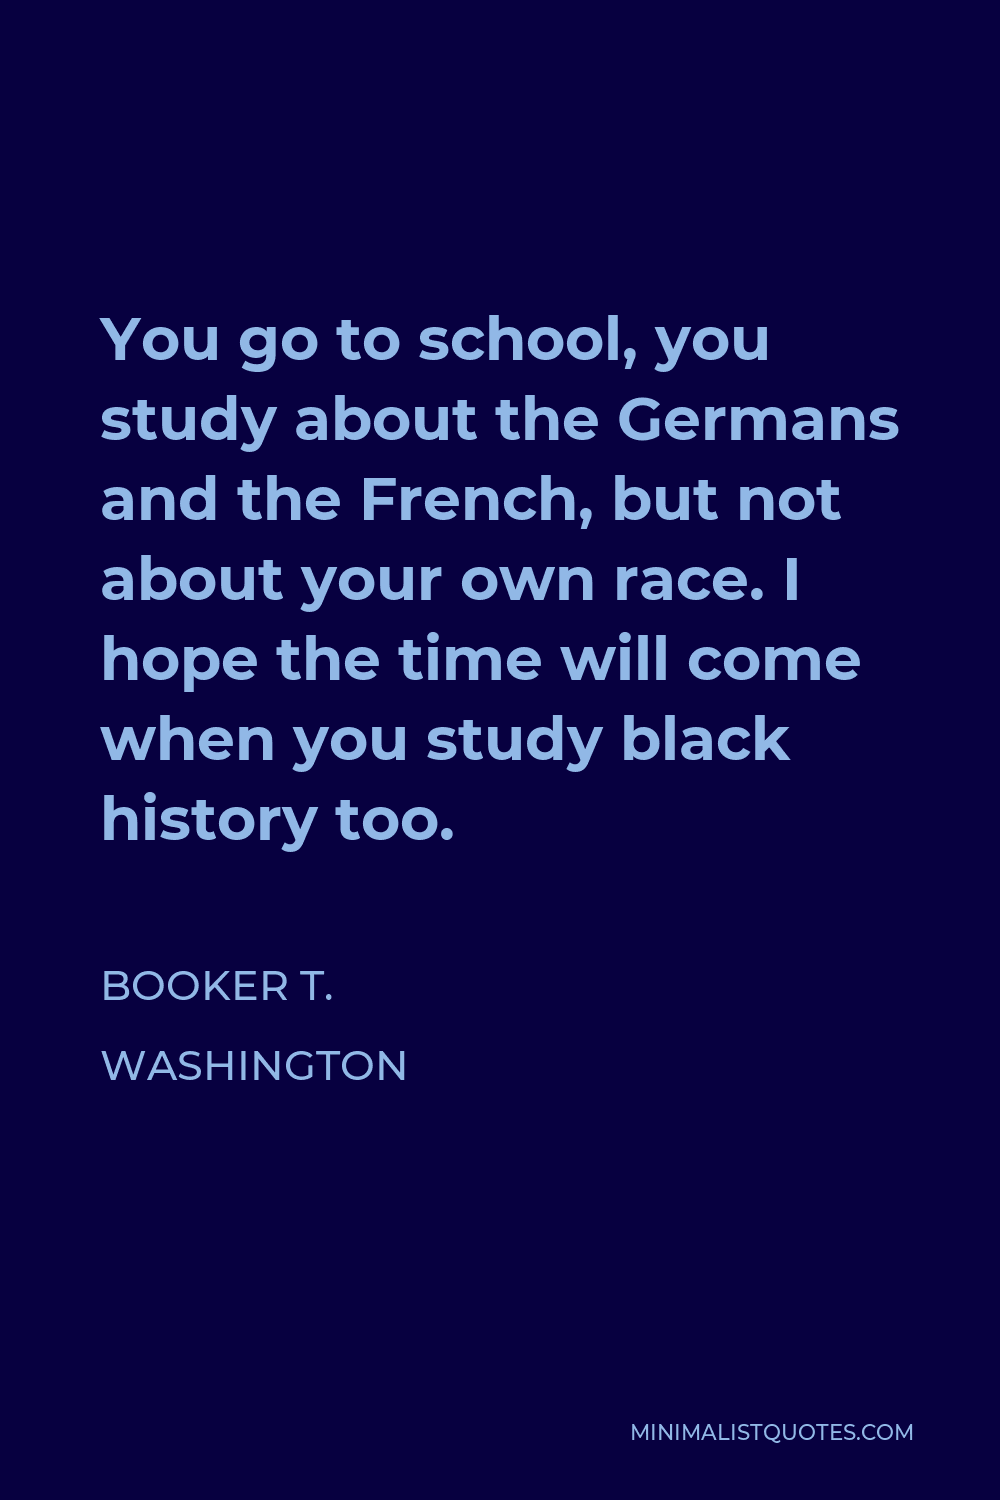 Booker T. Washington Quote - You go to school, you study about the Germans and the French, but not about your own race. I hope the time will come when you study black history too.